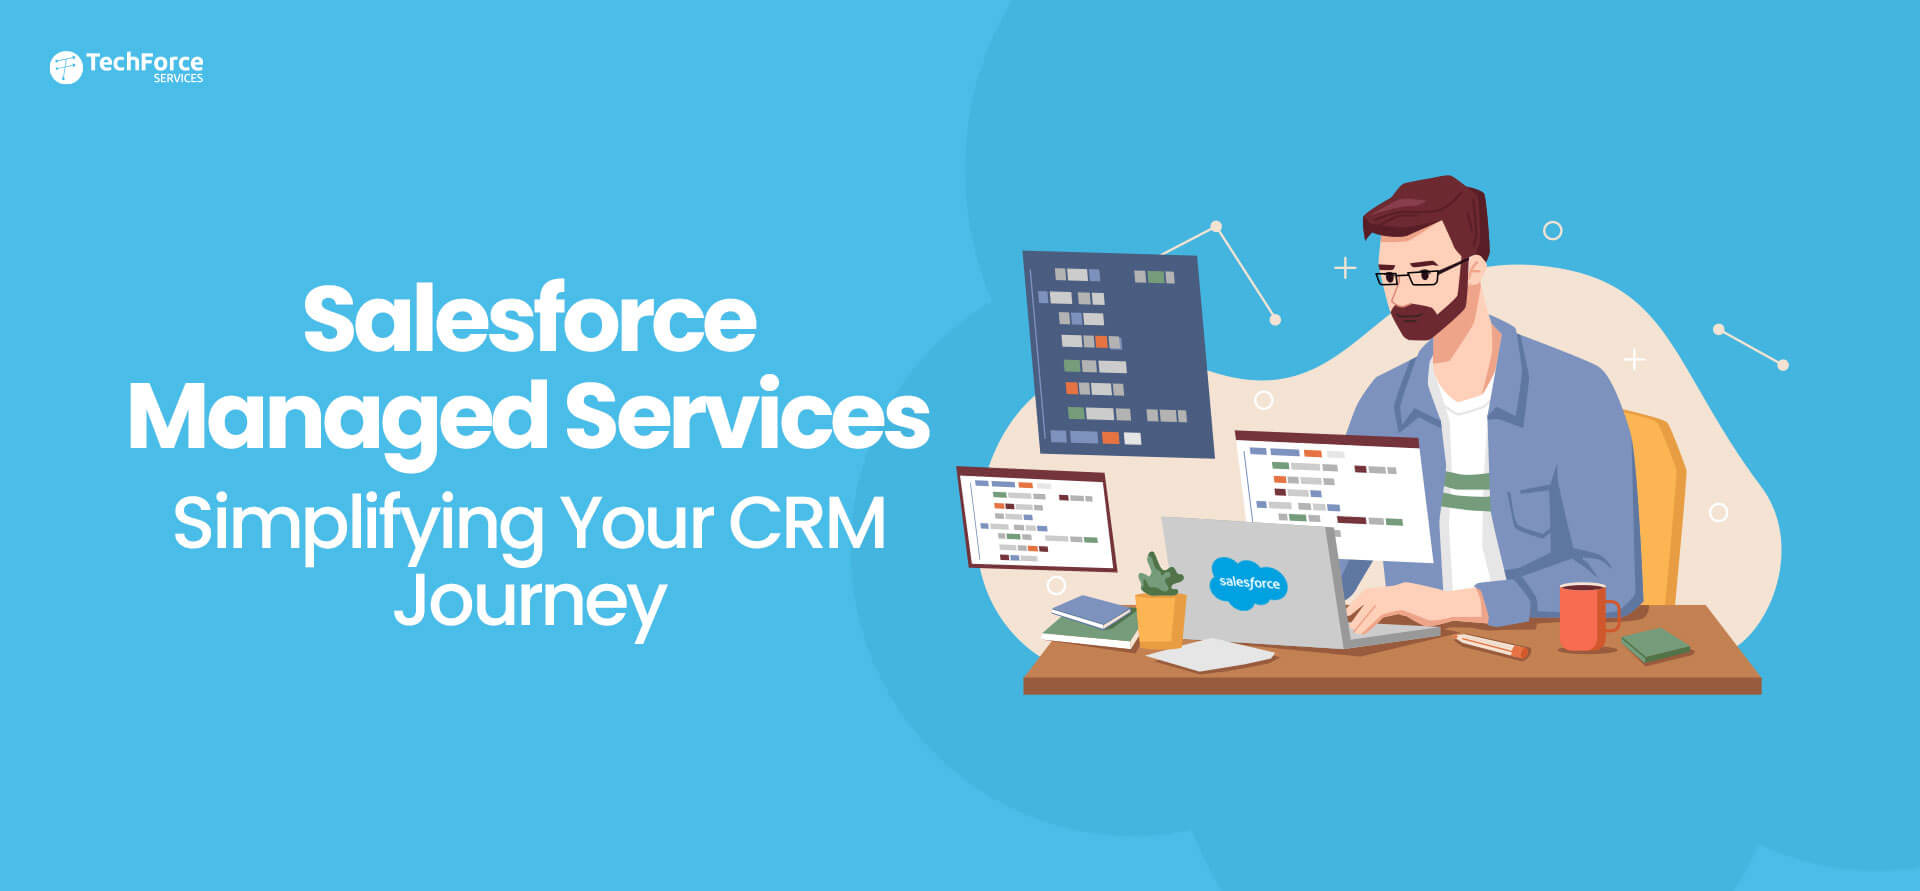 Salesforce-Managed-Services-Simplifying-Your-CRM-Journey